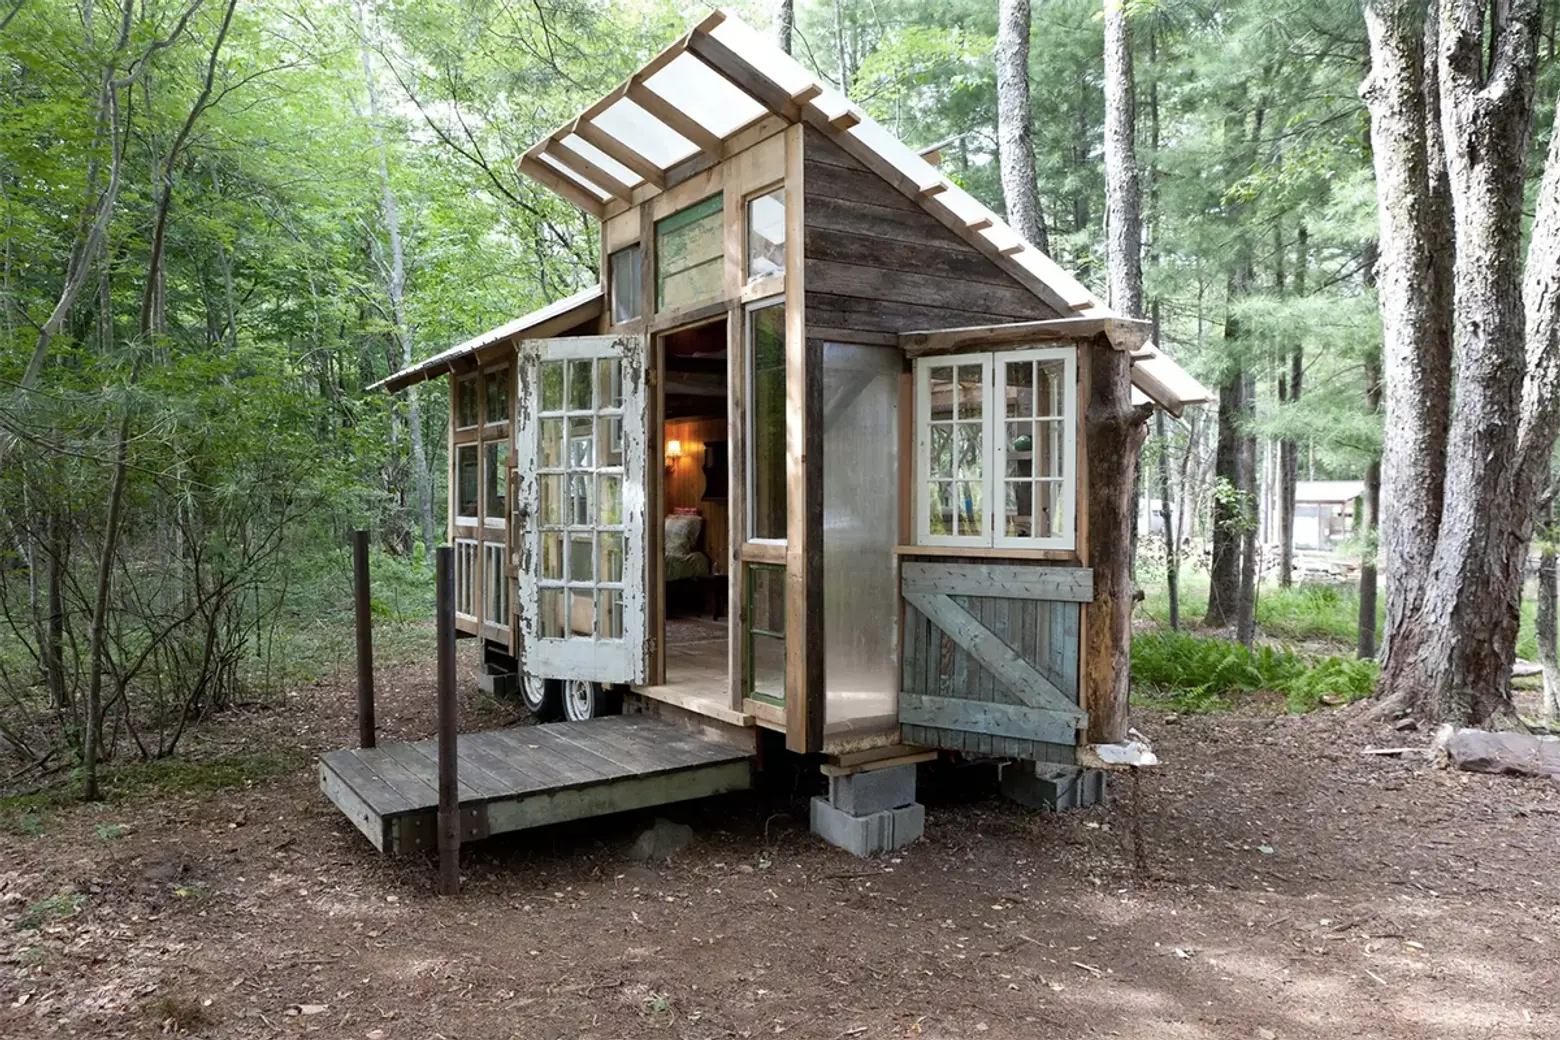 I live with my cat in a 388-square-foot tiny home in a national forest.  Here's what it's really like